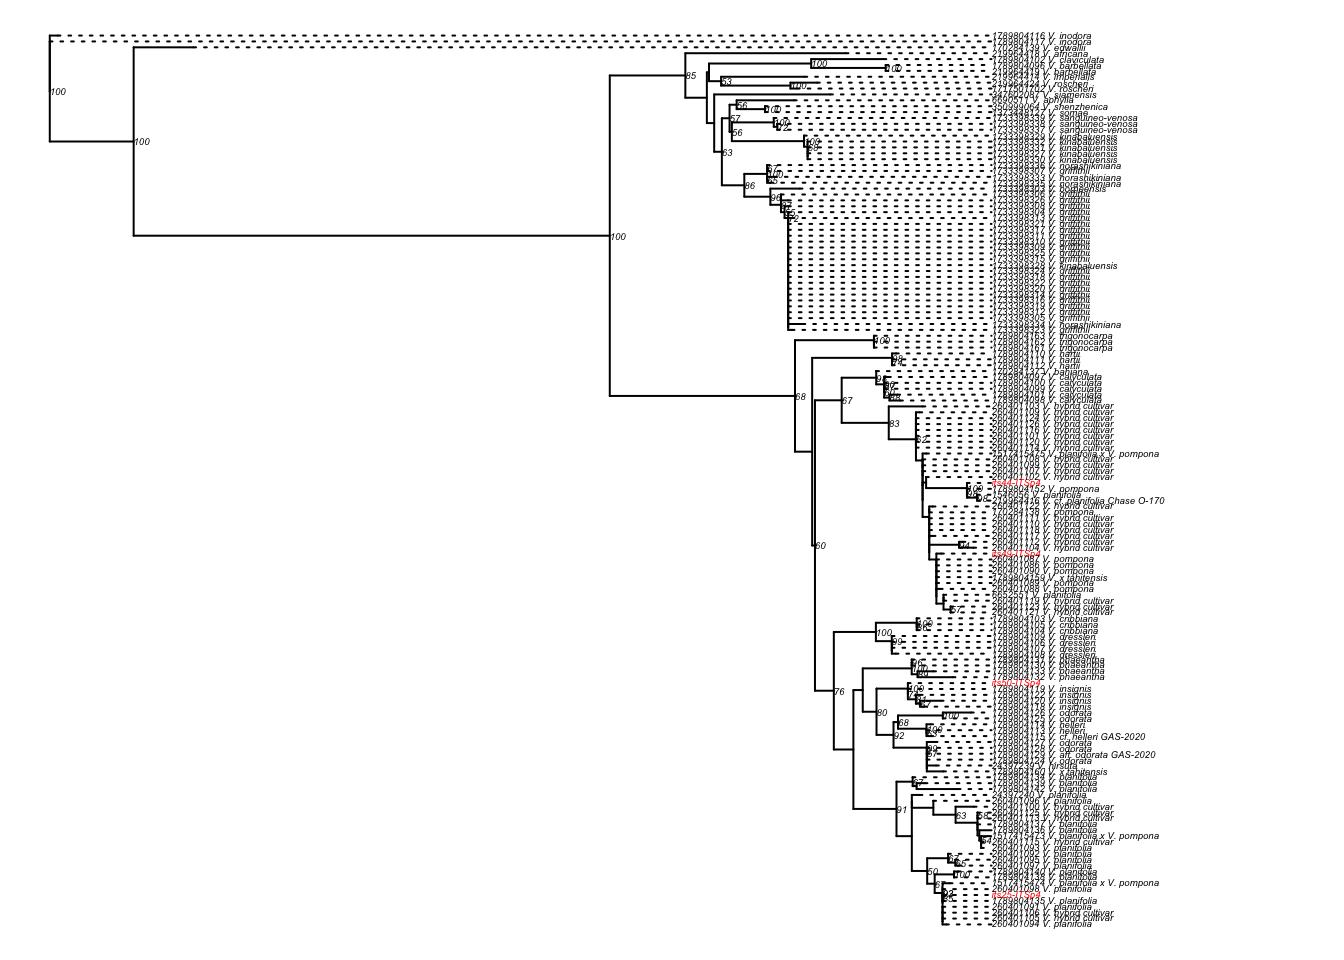 RaxML ITS rooted phylogenetic tree of species of Vanilla.